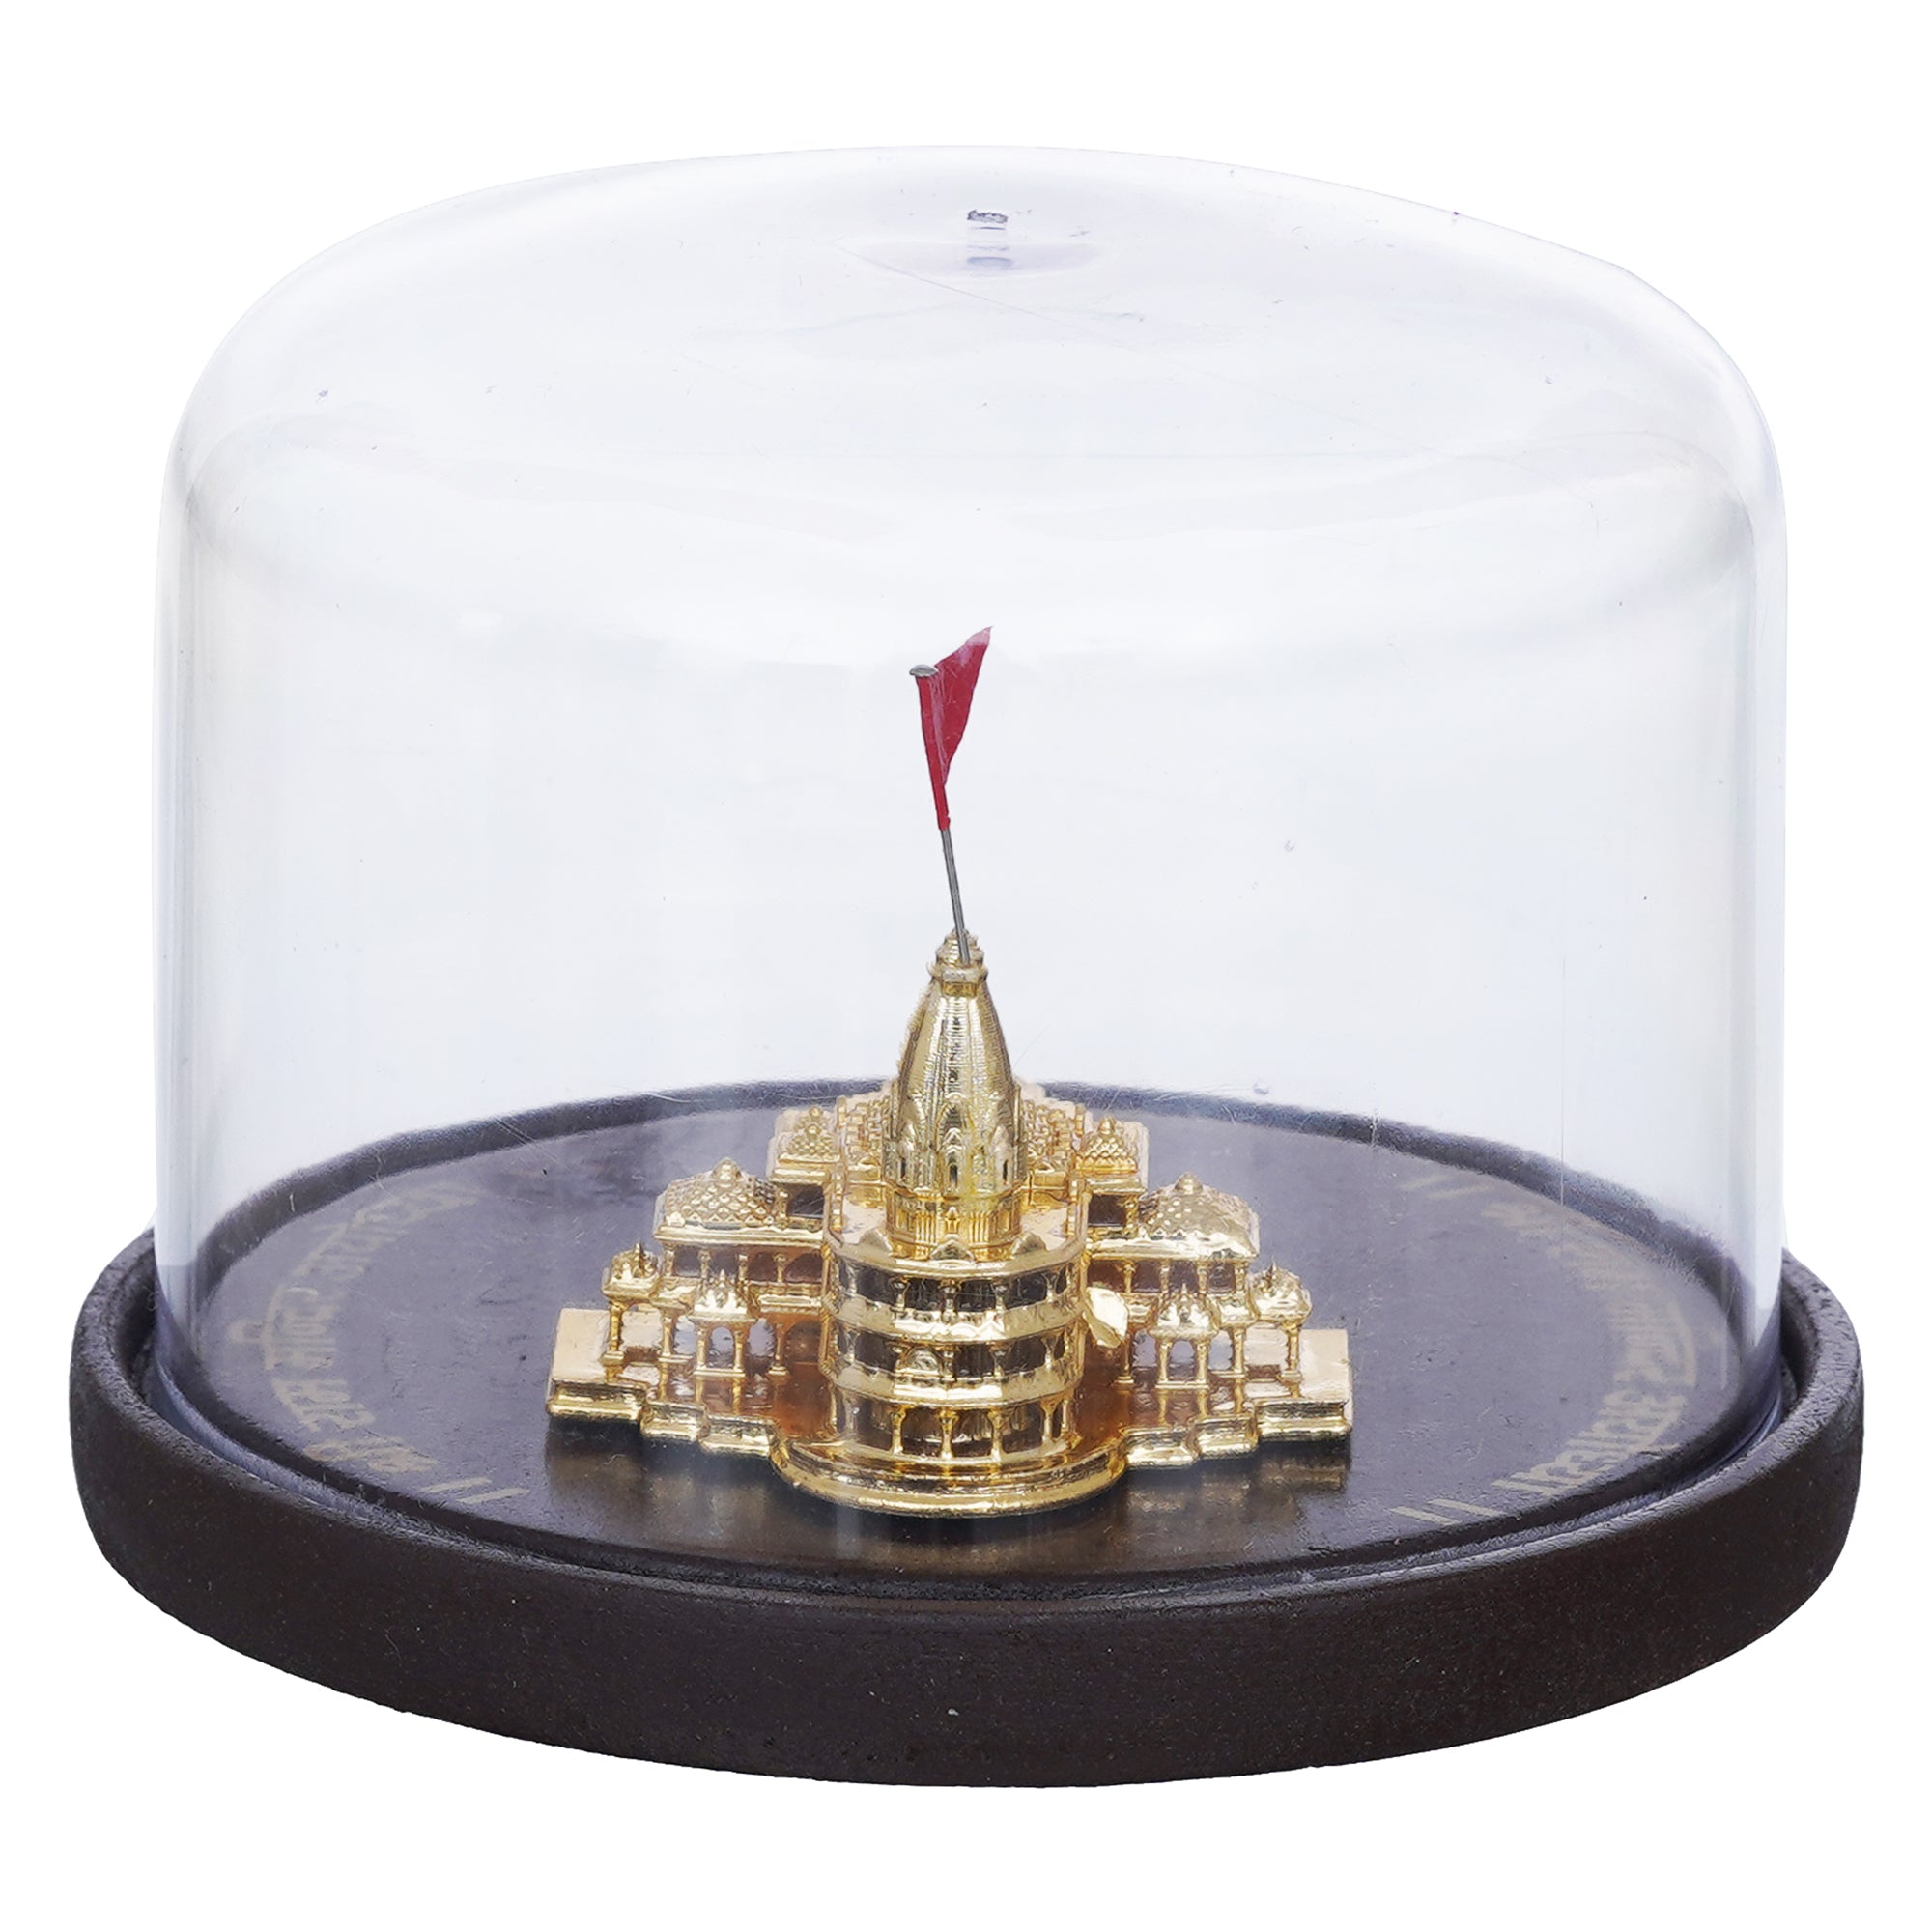 eCraftIndia Golden Shri Ram Mandir Ayodhya Model Authentic Designer Temple Covered by a Glass Dome - Perfect for Home Decor, and Spiritual Gifting 8